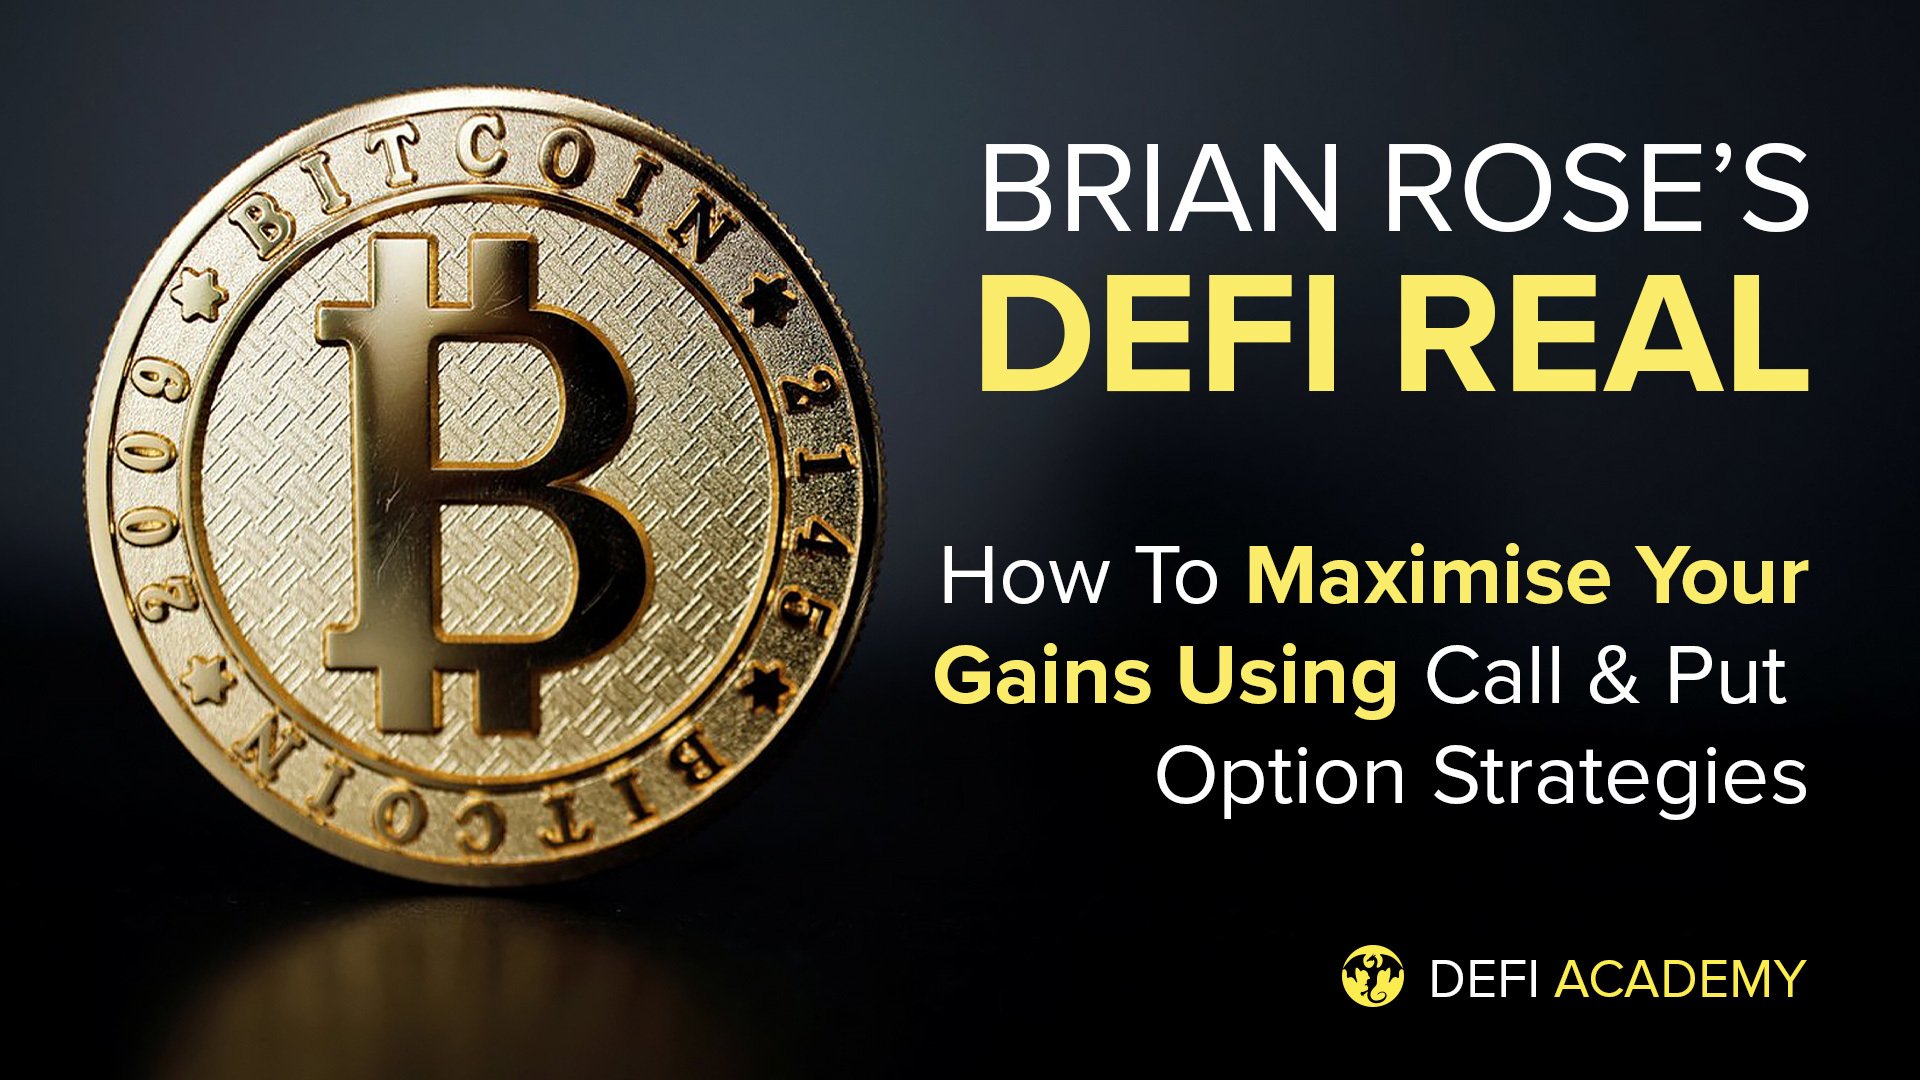 DeFi Real - How Maximise Your Gains Using Call & Put Option Strategies